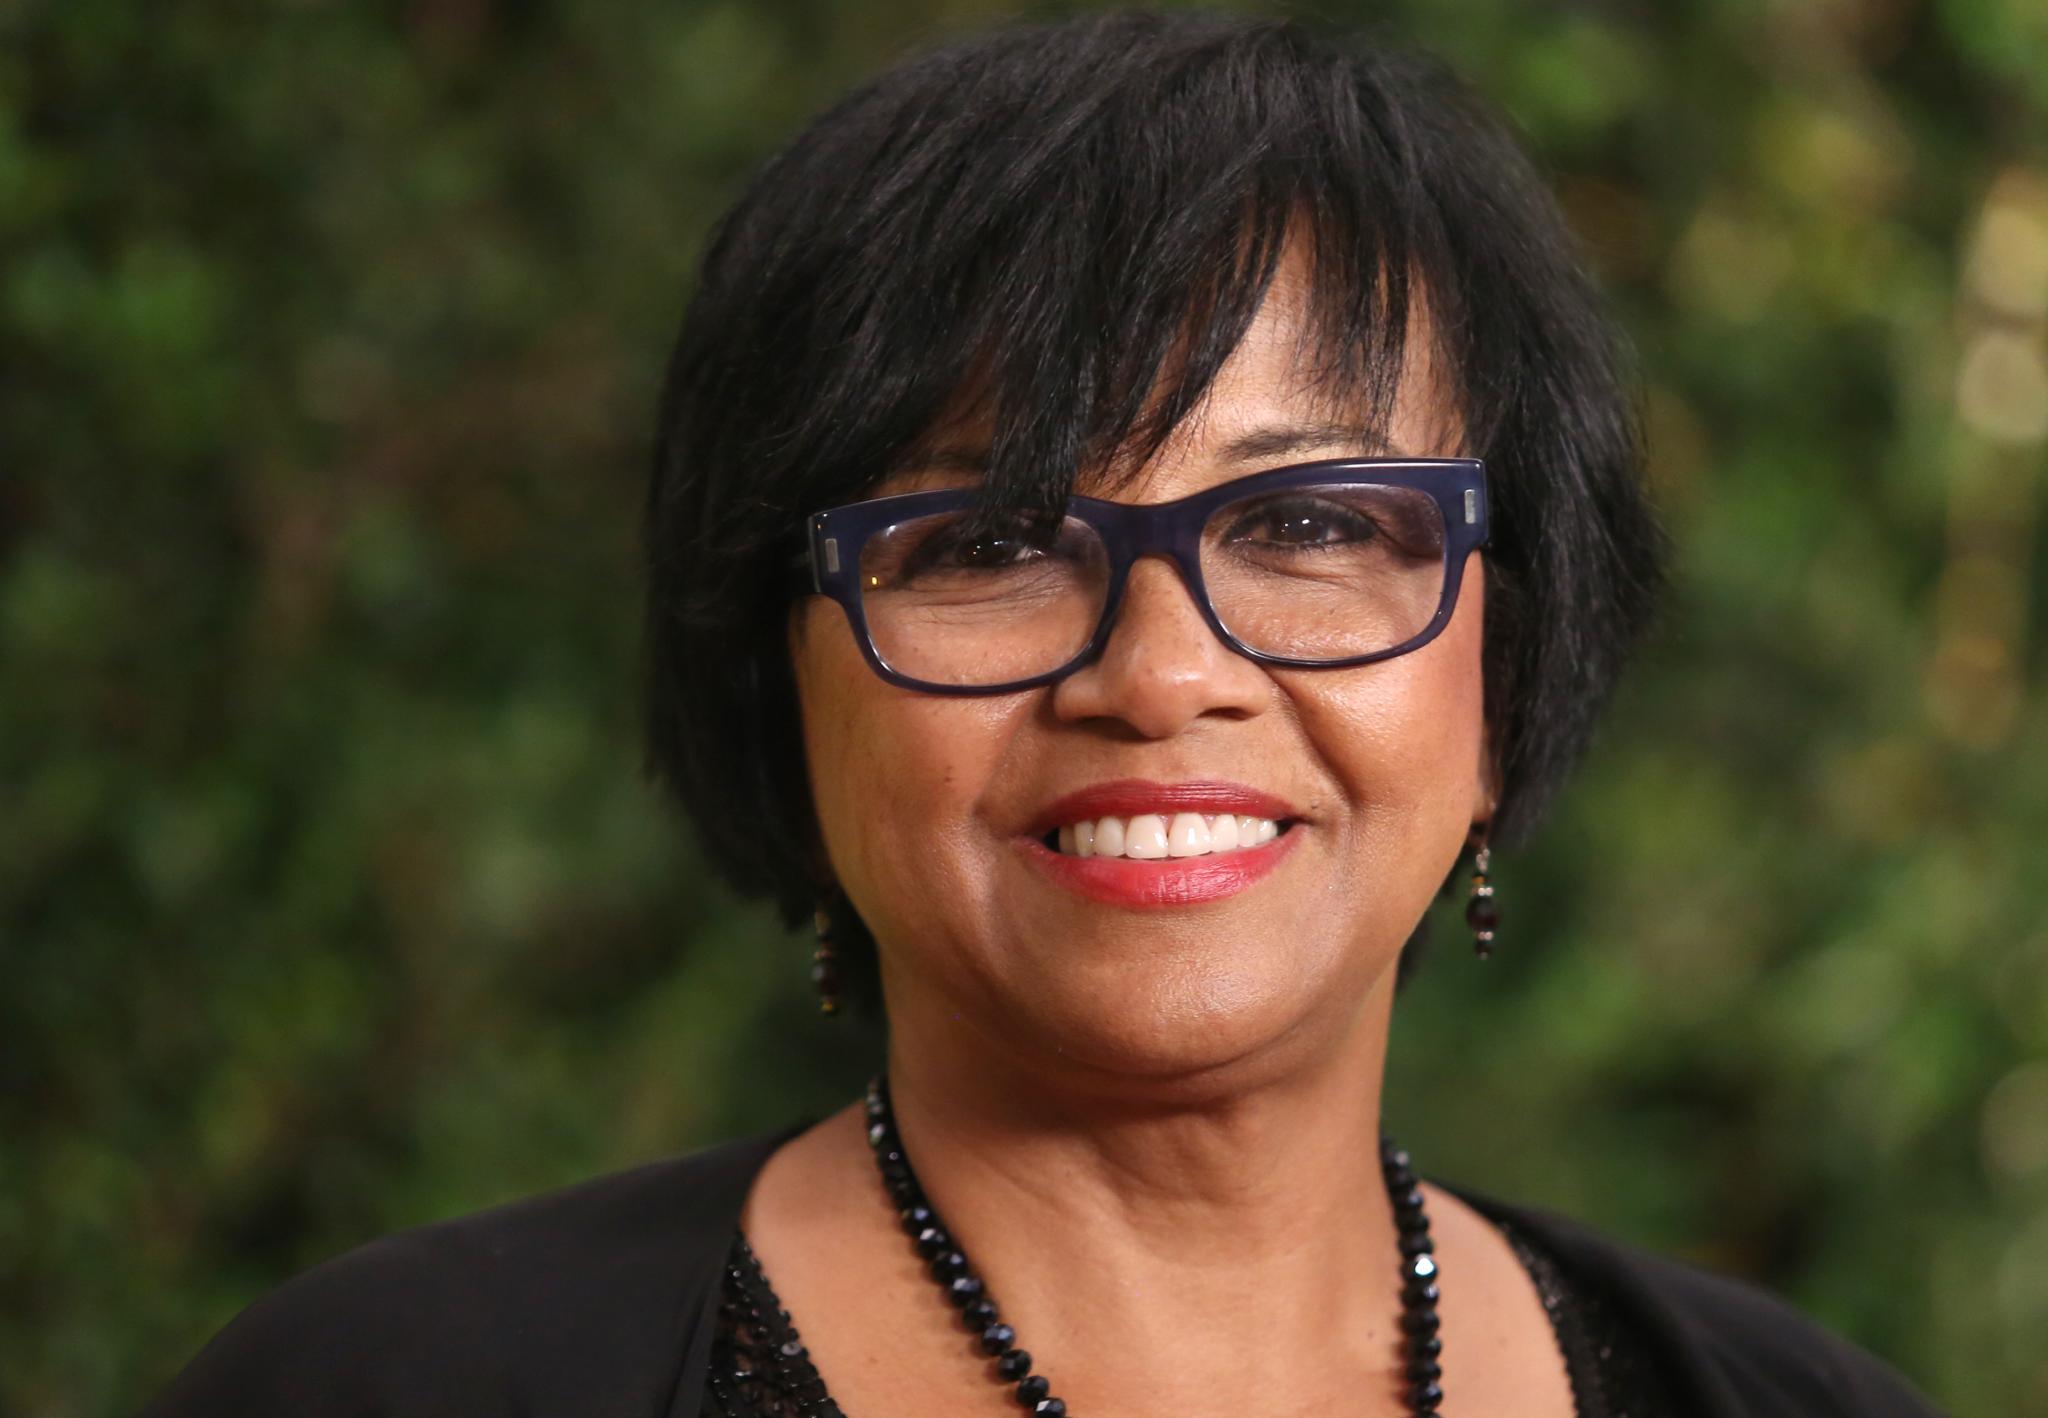 Academy of Motion Pictures Elects Black President